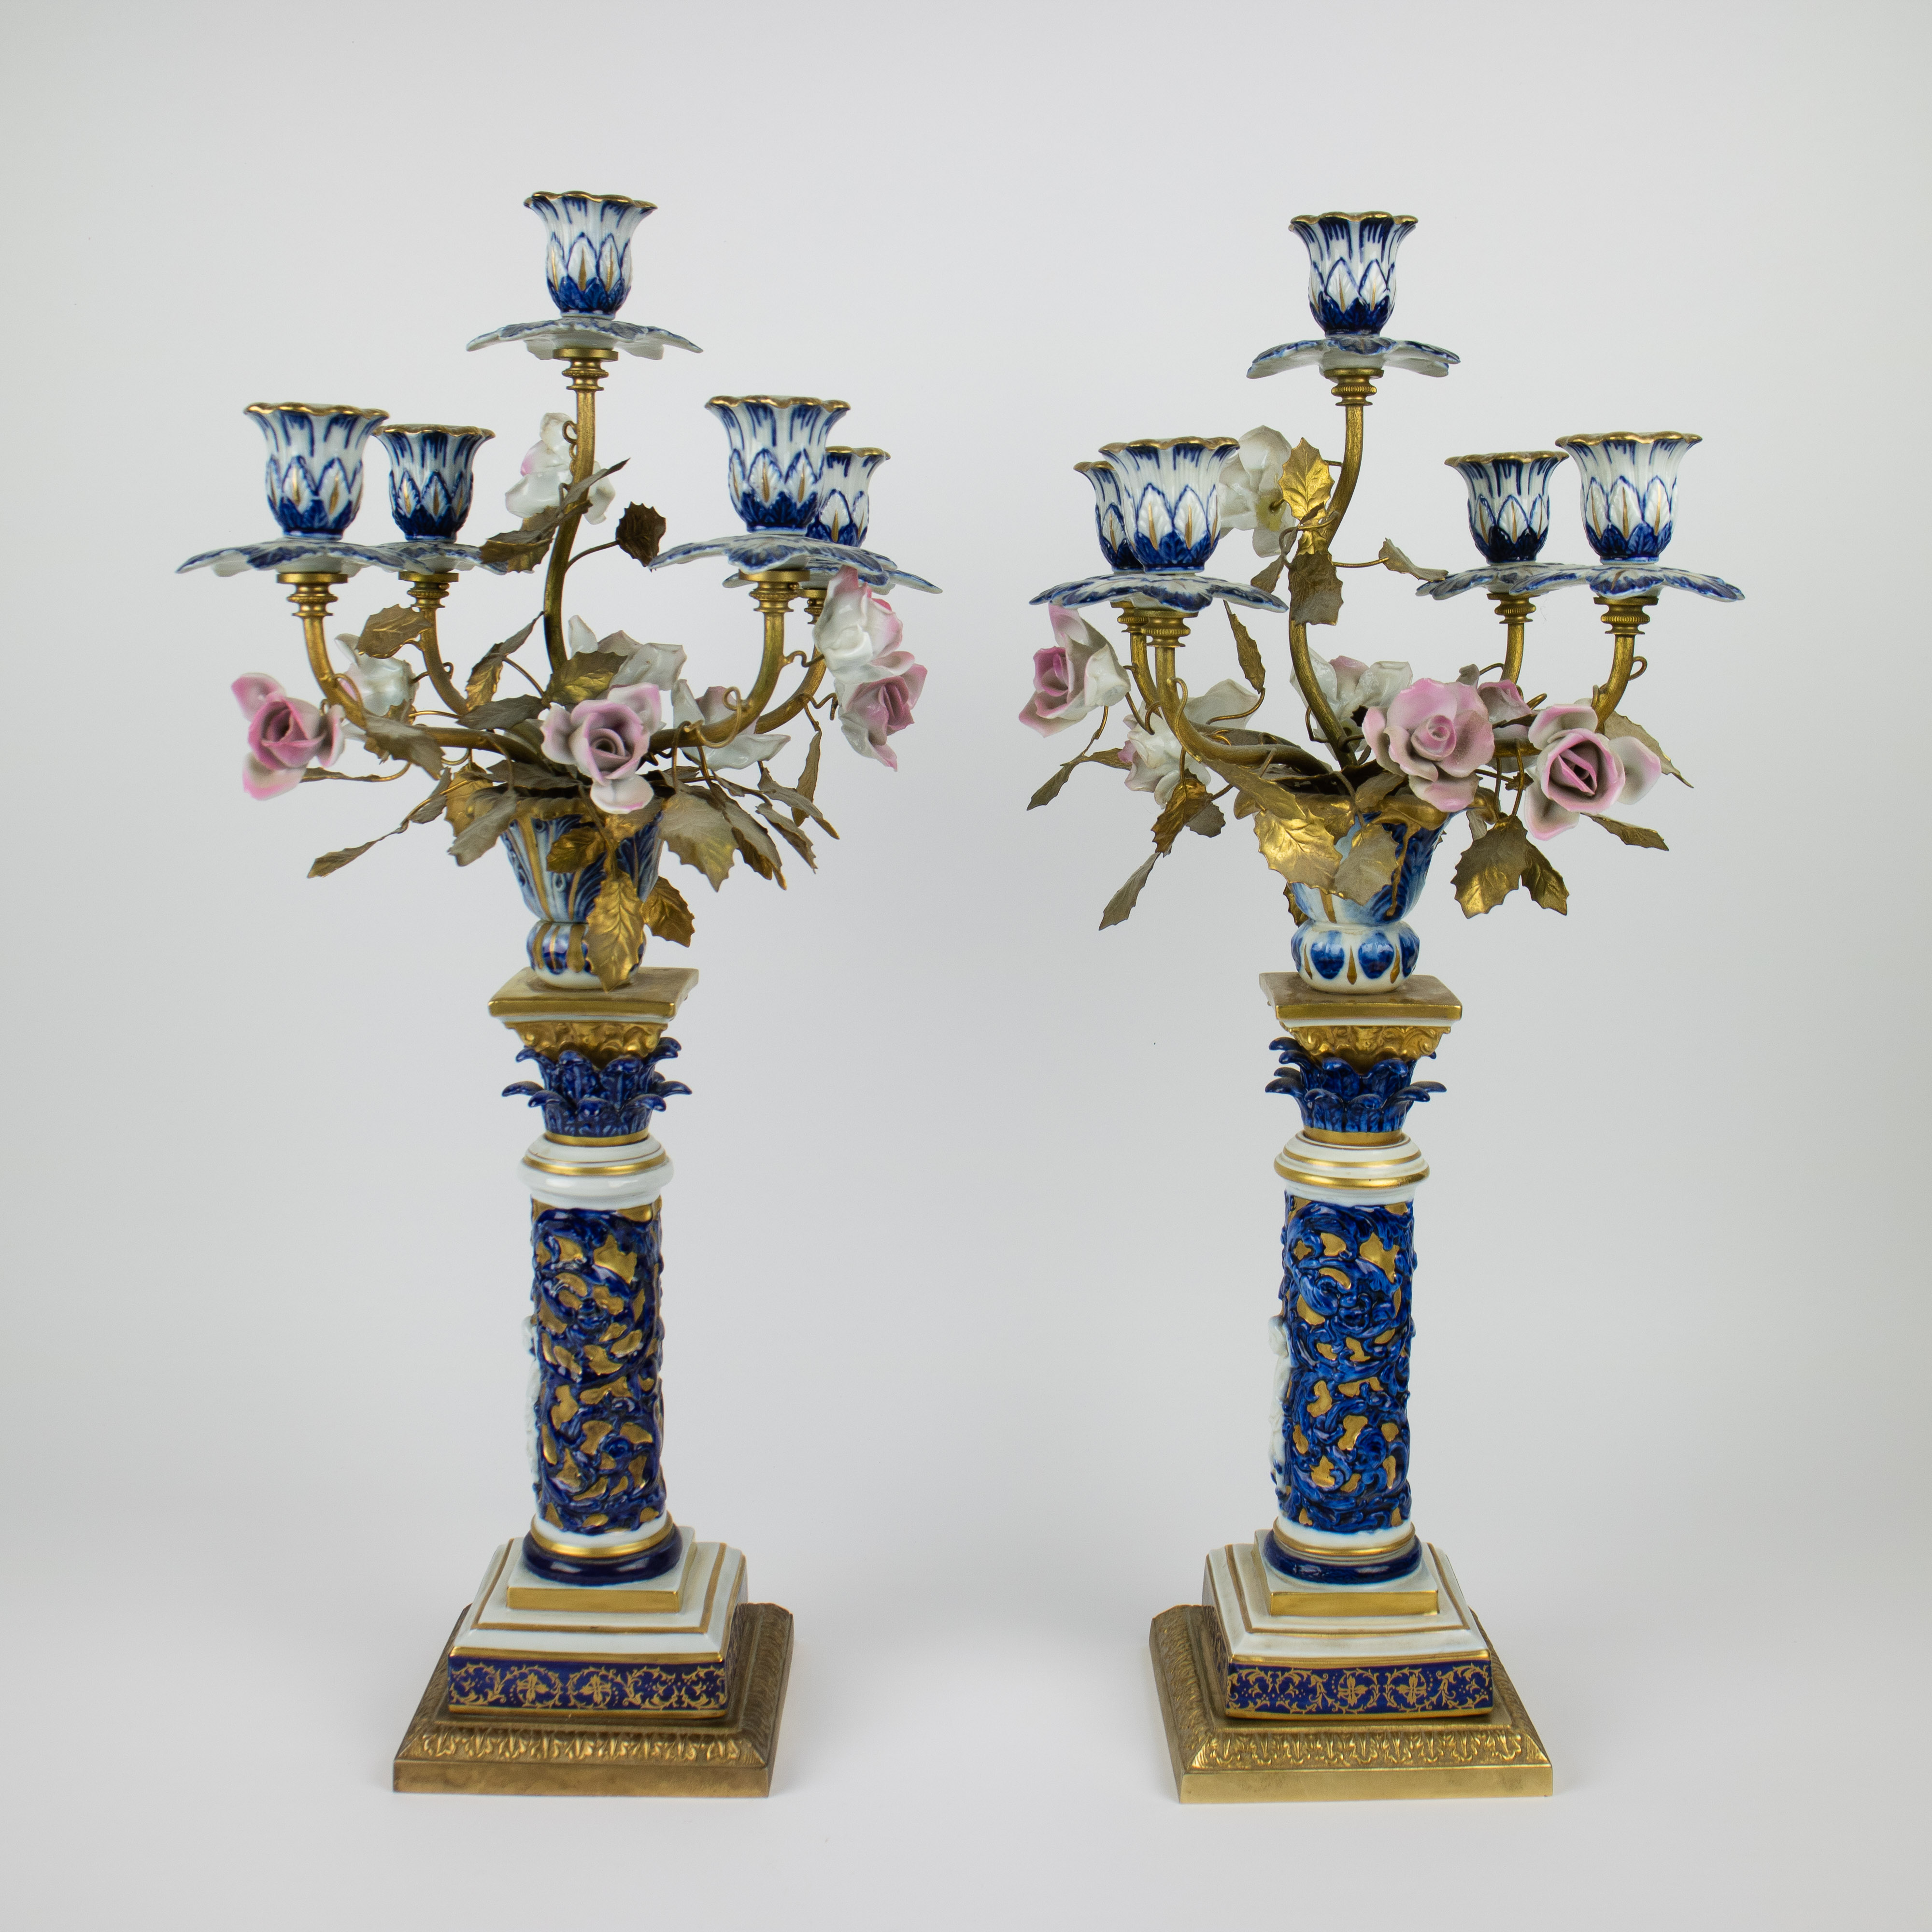 Pair of porcelain candlesticks and gilt metal, Italian - Image 2 of 6